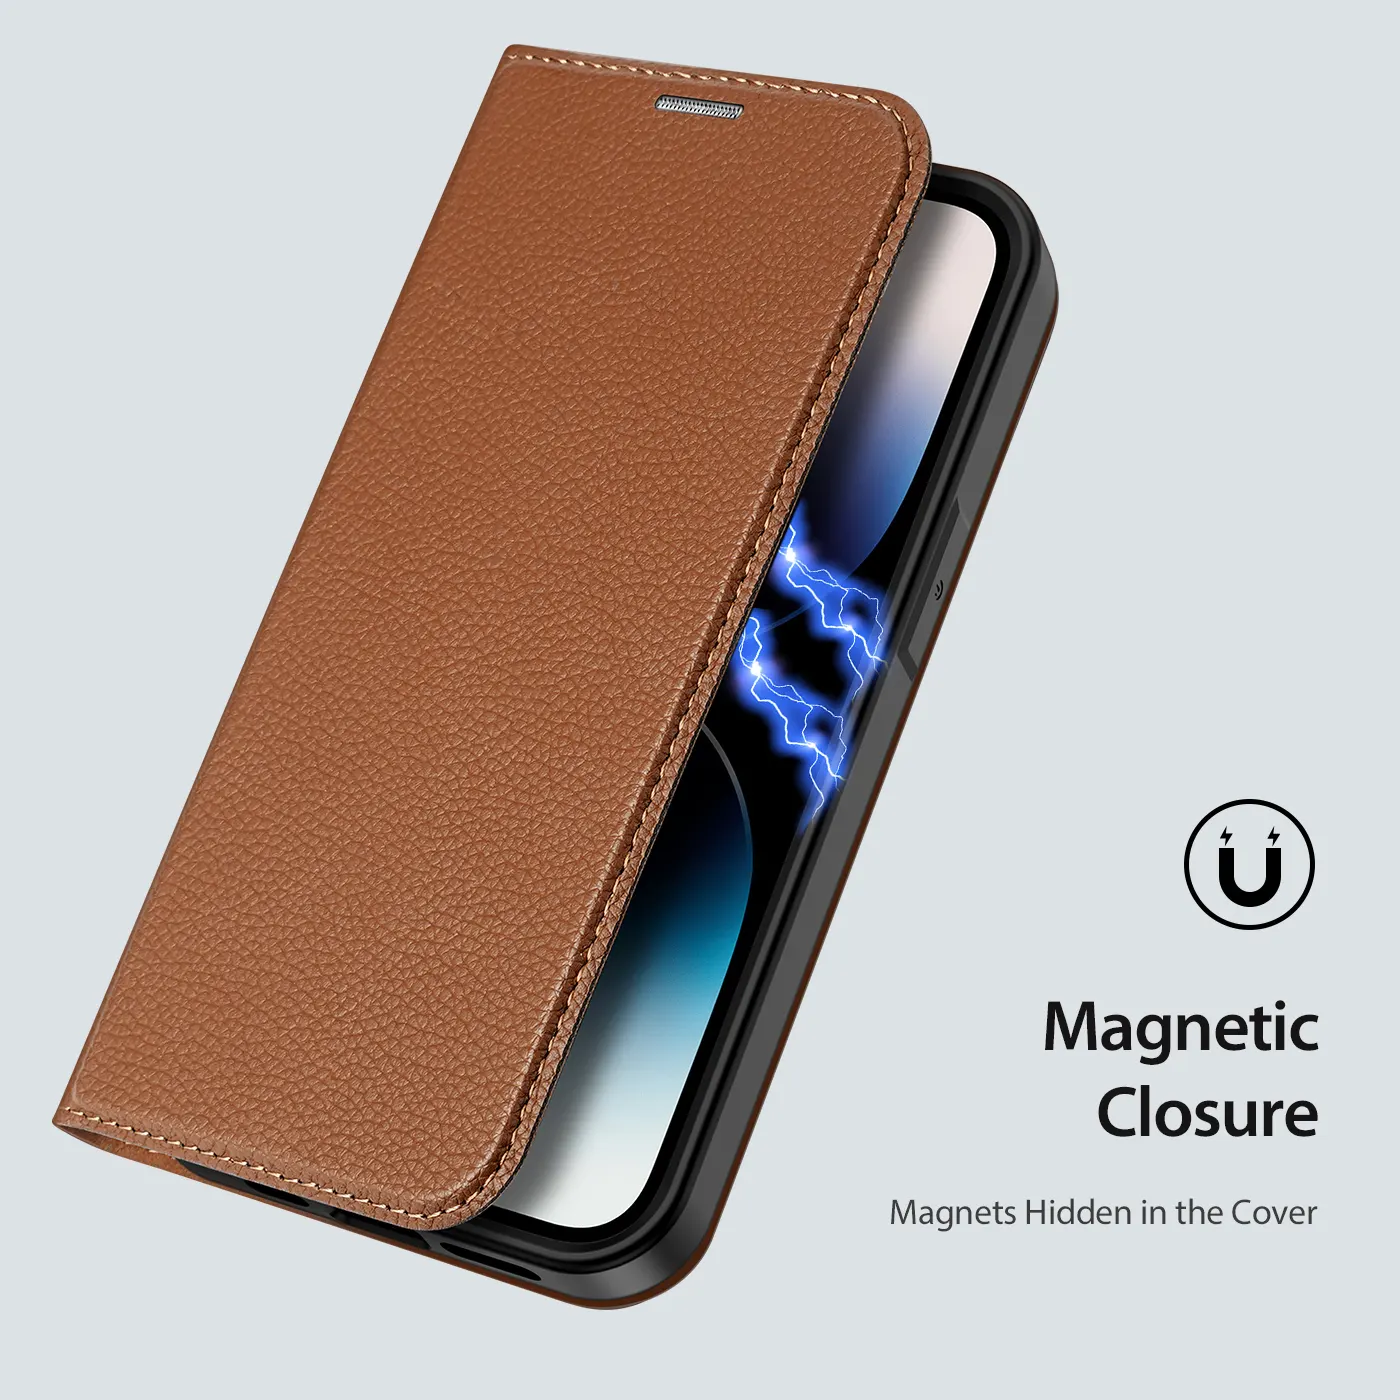 Skin x2 magnetic folio pu leather case for iphone 14 pro max plus mobile phone cover card holder hands-free